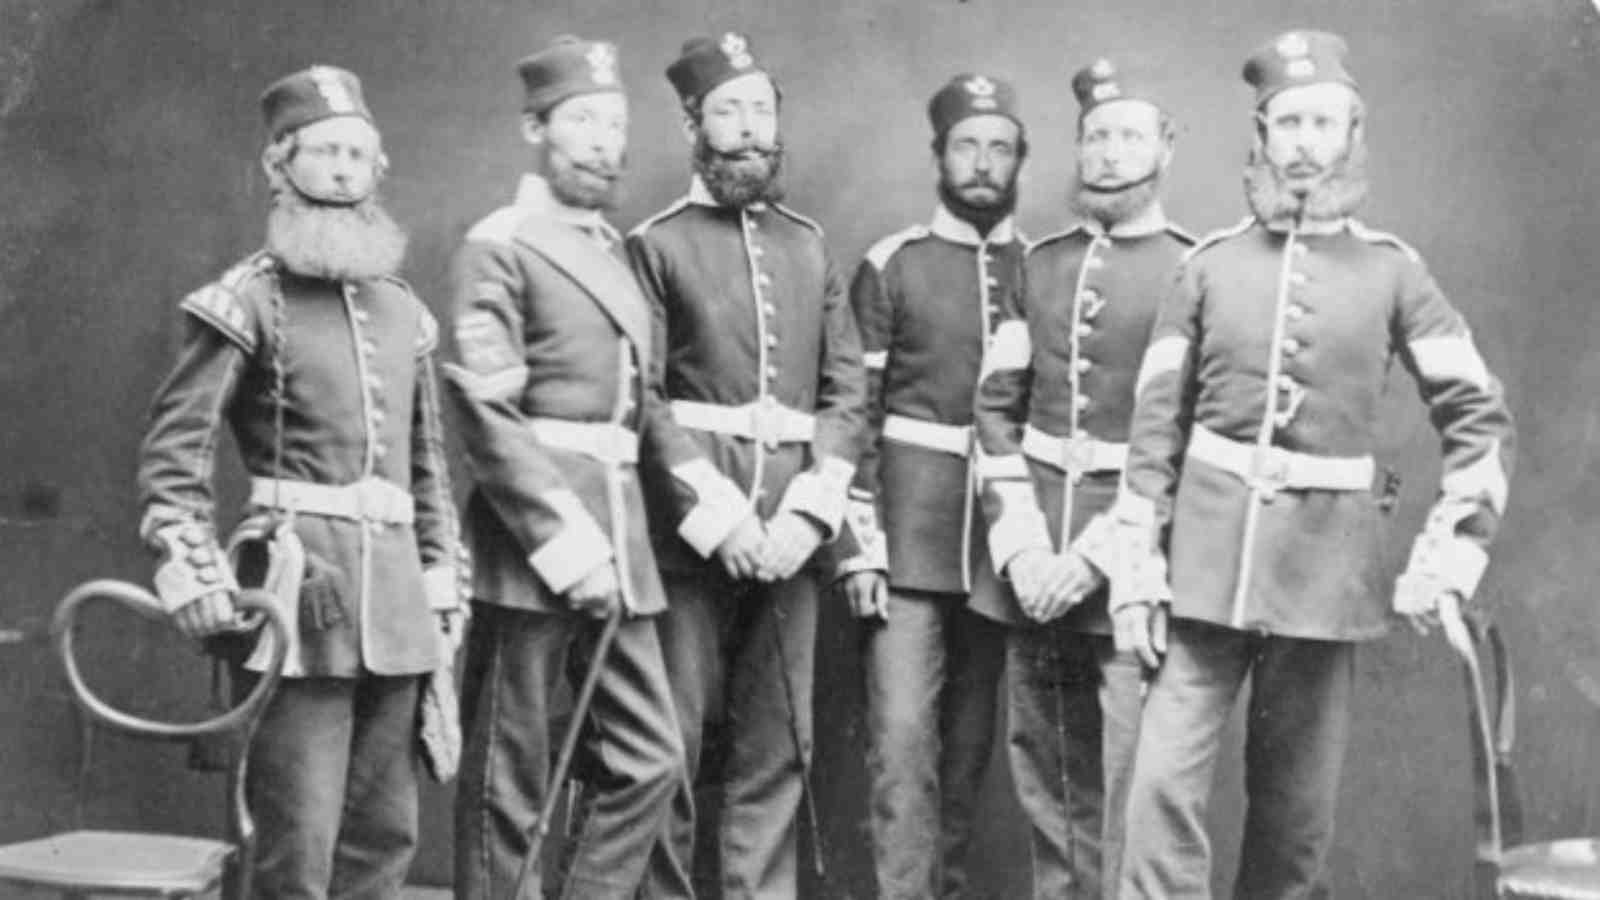 Six soldiers Soldiers of the Light Infantry Company, 65th Regiment 